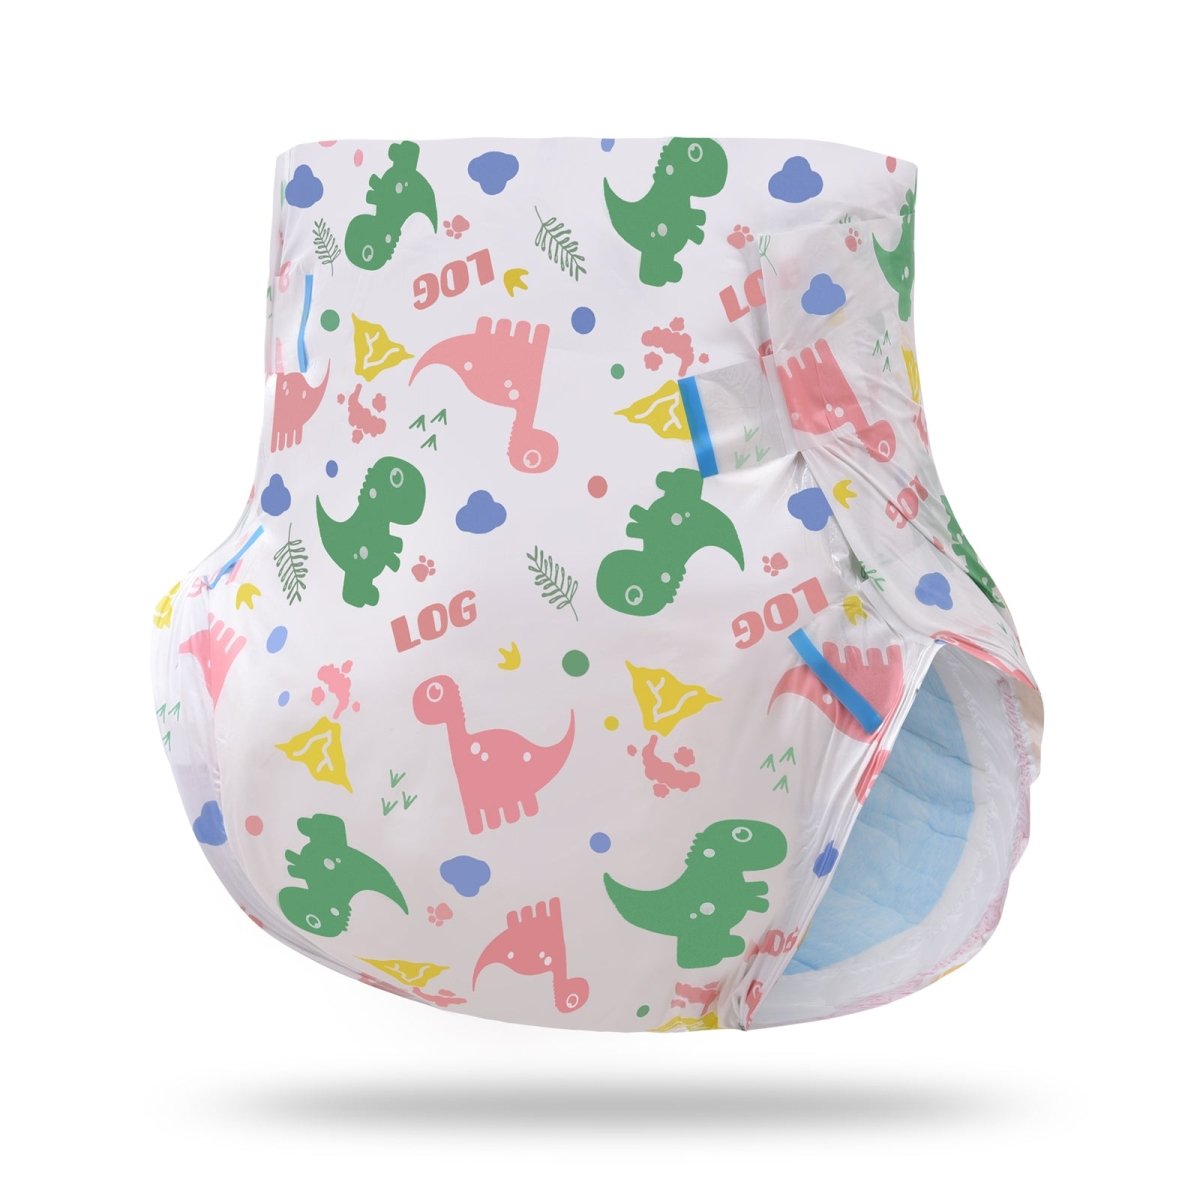 https://landofgenie.com/cdn/shop/products/landofgenie-adult-abdl-diapers-overnight-adult-diapers-with-10-pieces-anime-dinosaur-329399.jpg?v=1708658339&width=1445